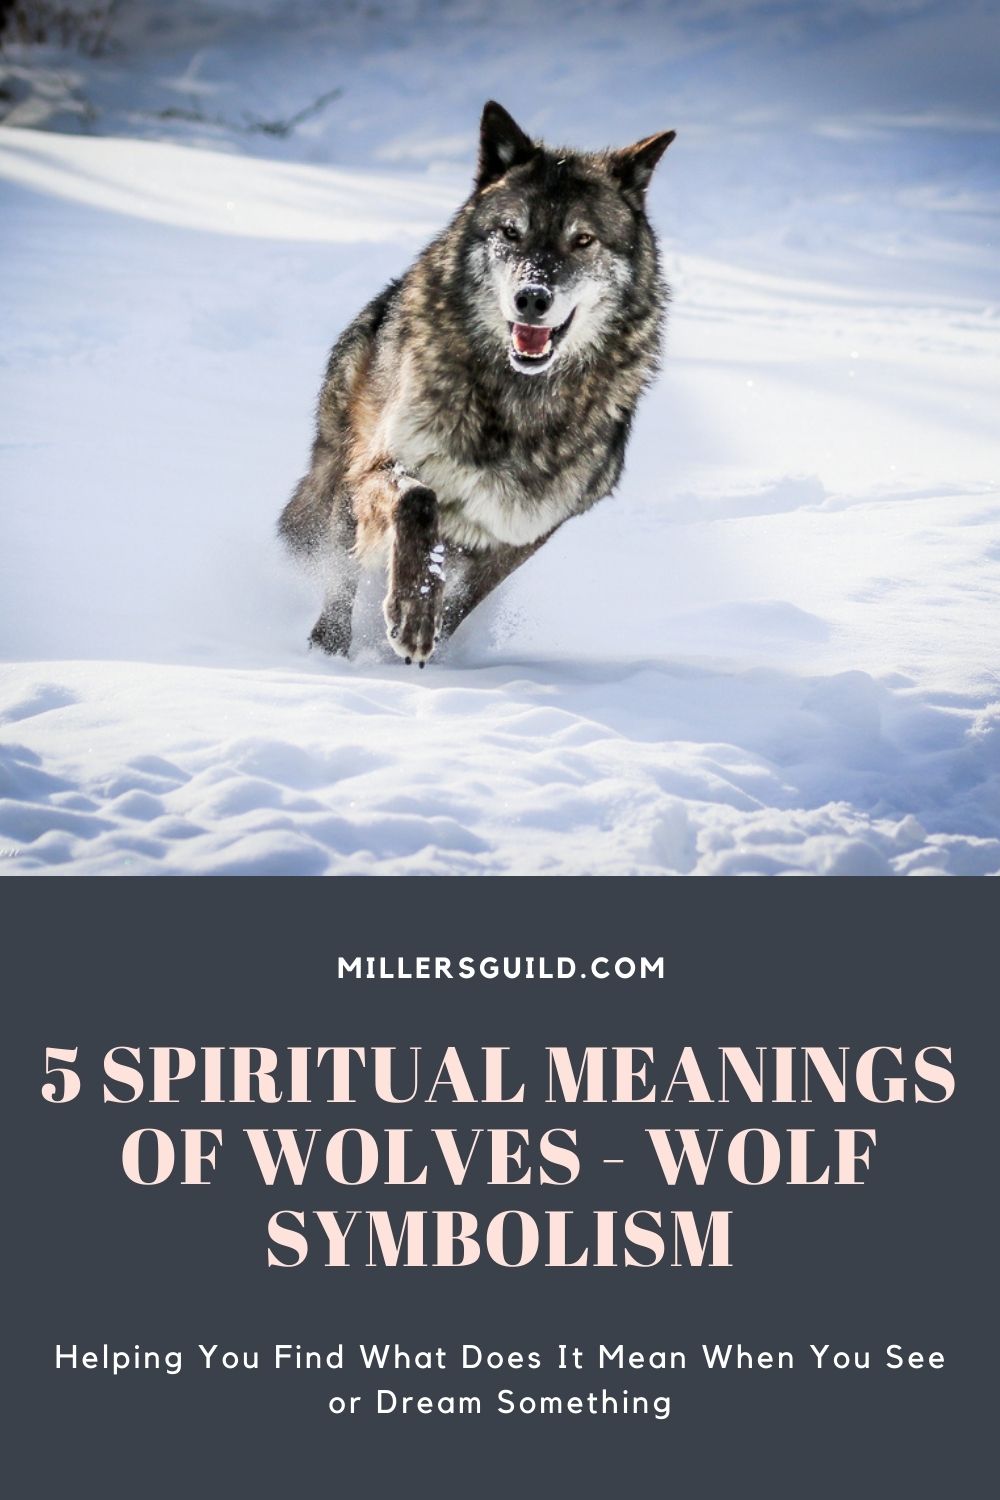 5 Spiritual Meanings of Wolves - Wolf Symbolism 1